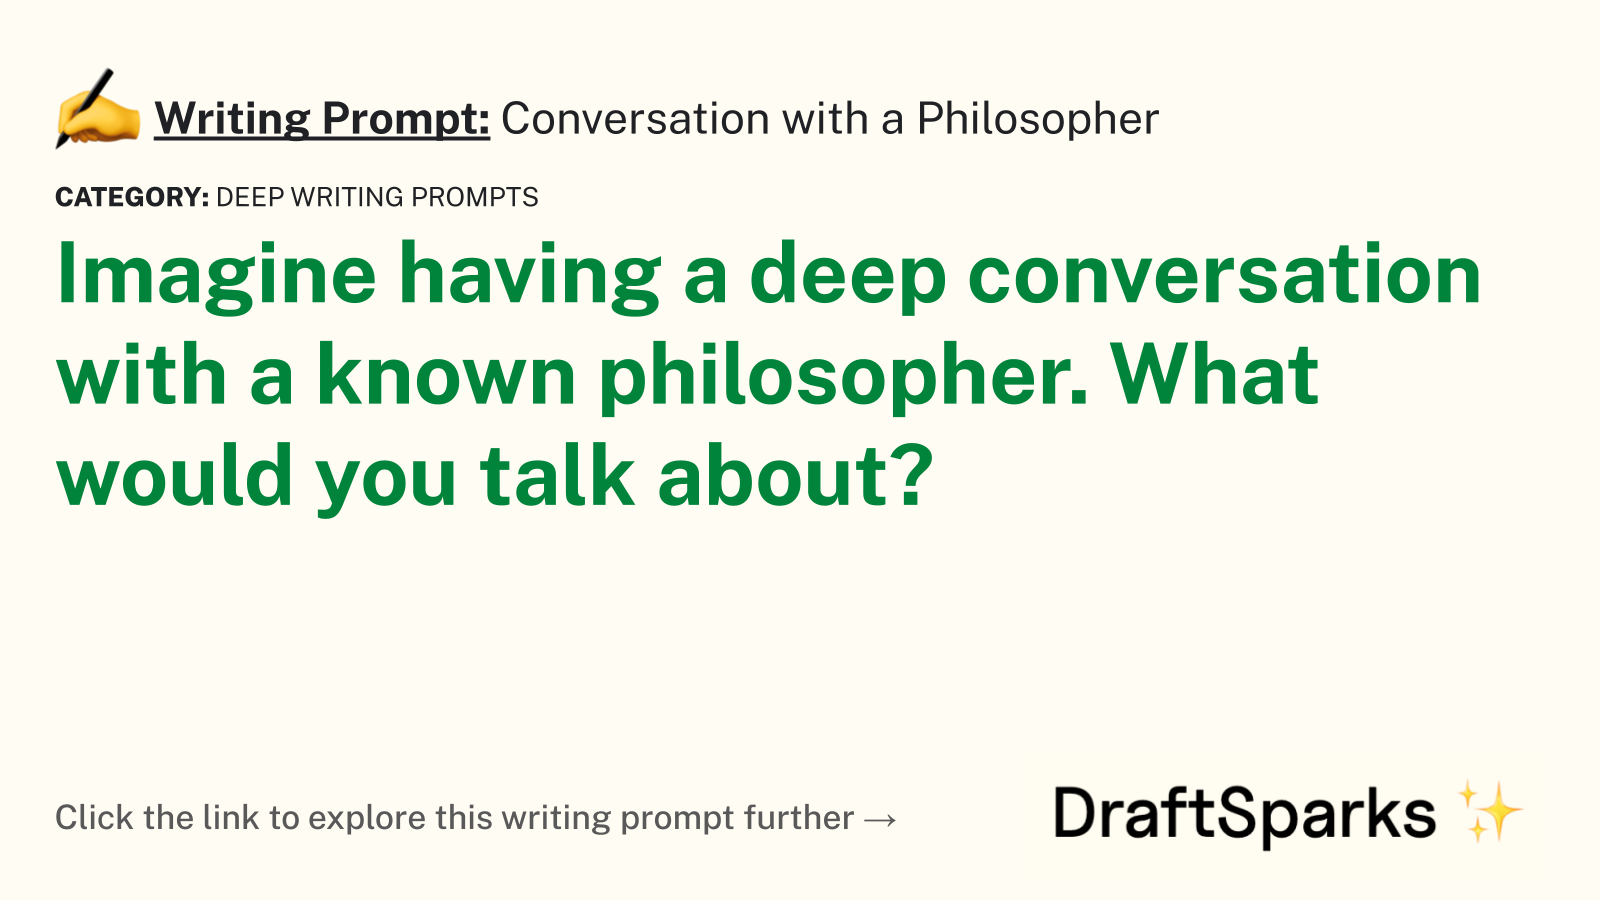 Conversation with a Philosopher